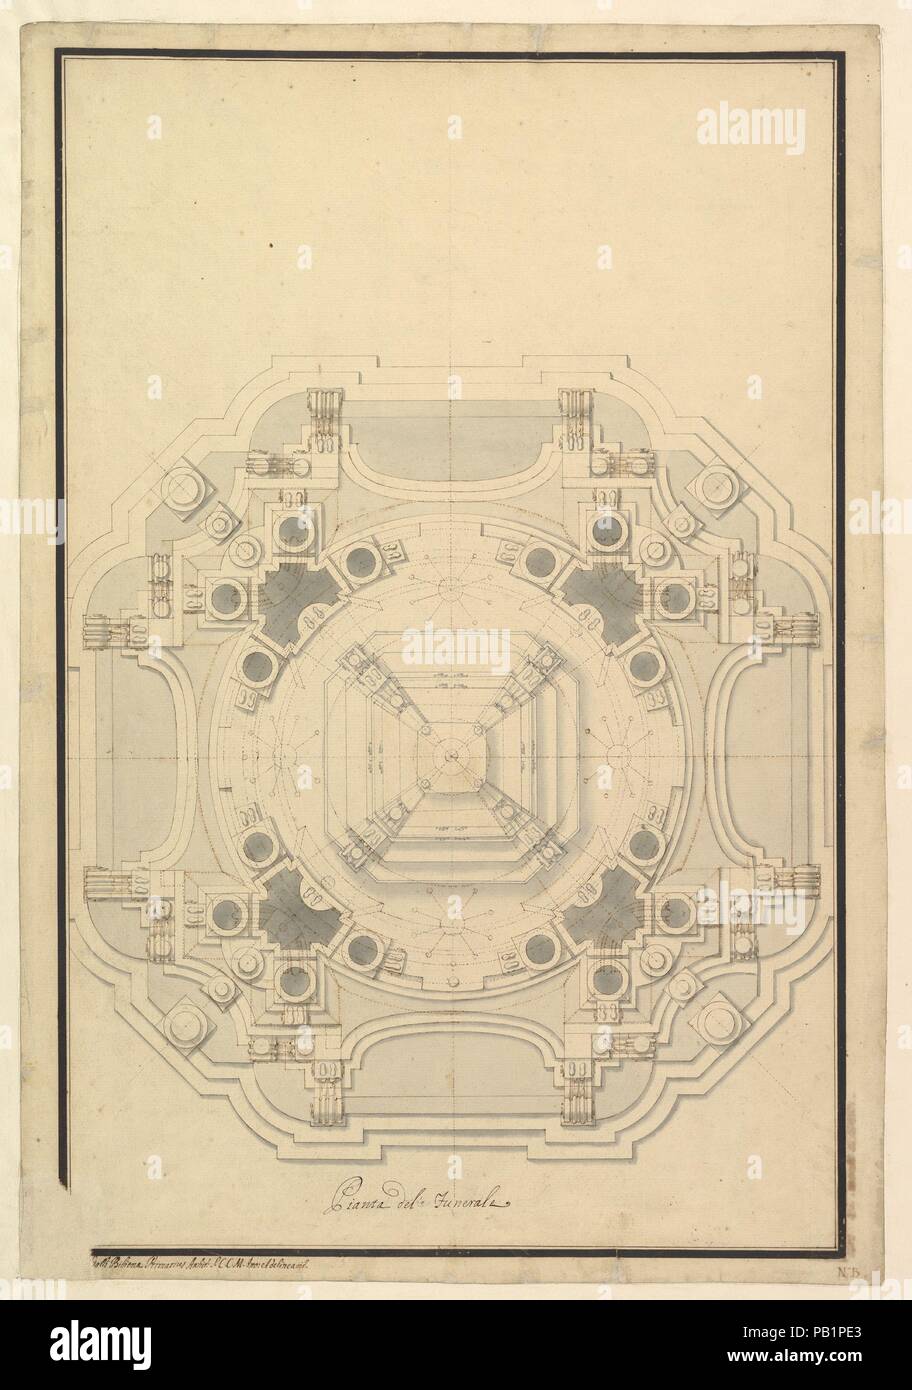 Ground Plan for the Catafalque for Louis XIV (d. 1715). Artist: Workshop of Giuseppe Galli Bibiena (Italian, Parma 1696-1756 Berlin). Dimensions: 21-1/4 x 14-5/8 in.  (54.0 x 37.1 cm). Date: ca. 1715. Museum: Metropolitan Museum of Art, New York, USA. Stock Photo